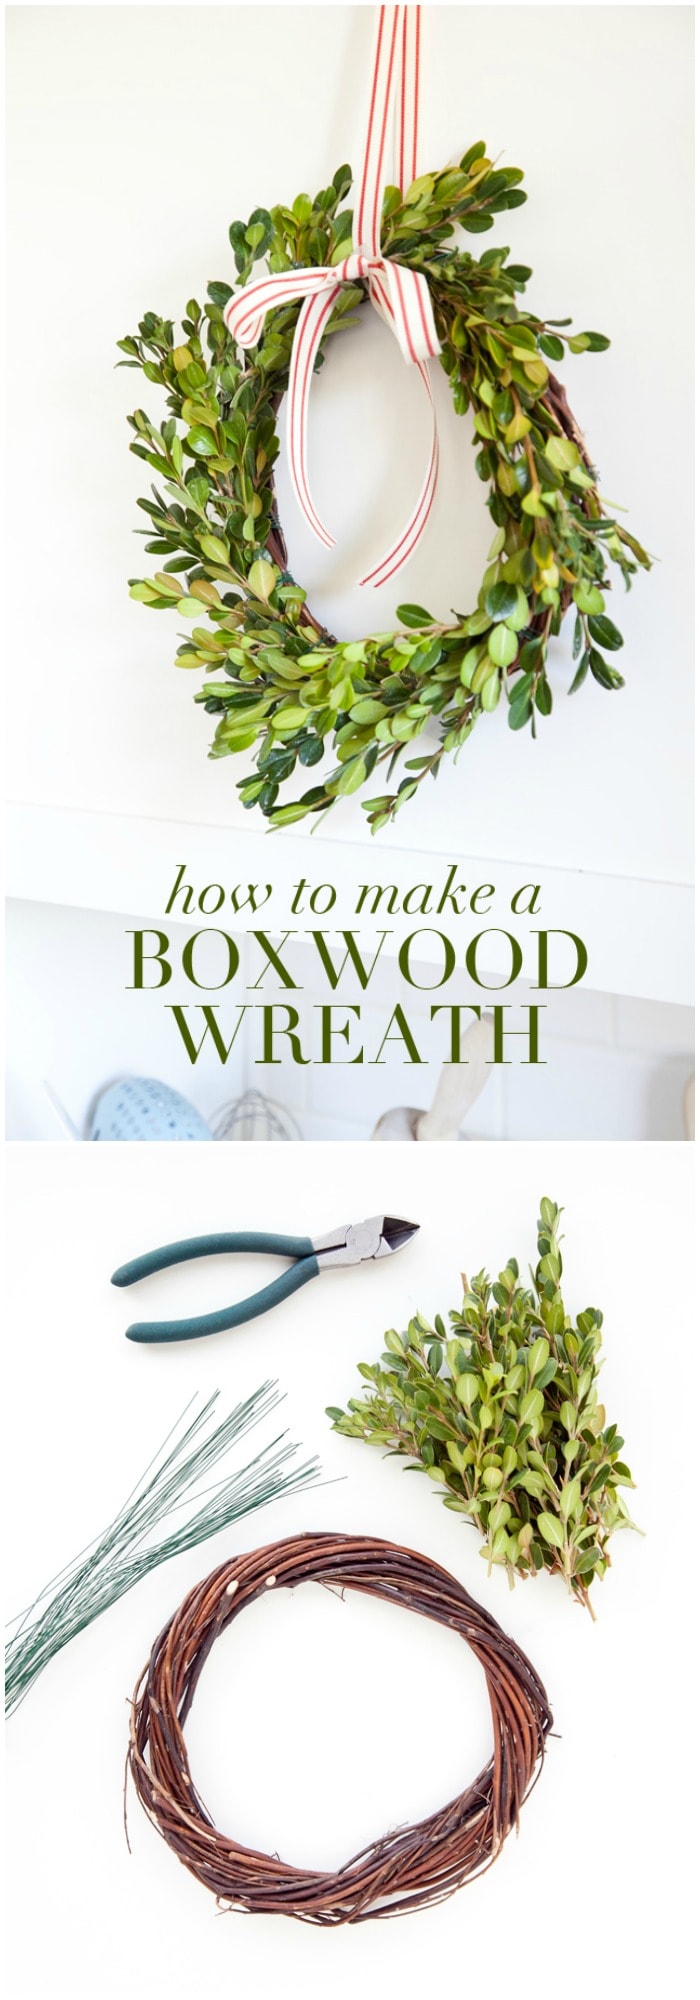 How to make a Boxwood wreath!! These wreaths are so versatile and add such a great pop of greenery where ever you place them! 